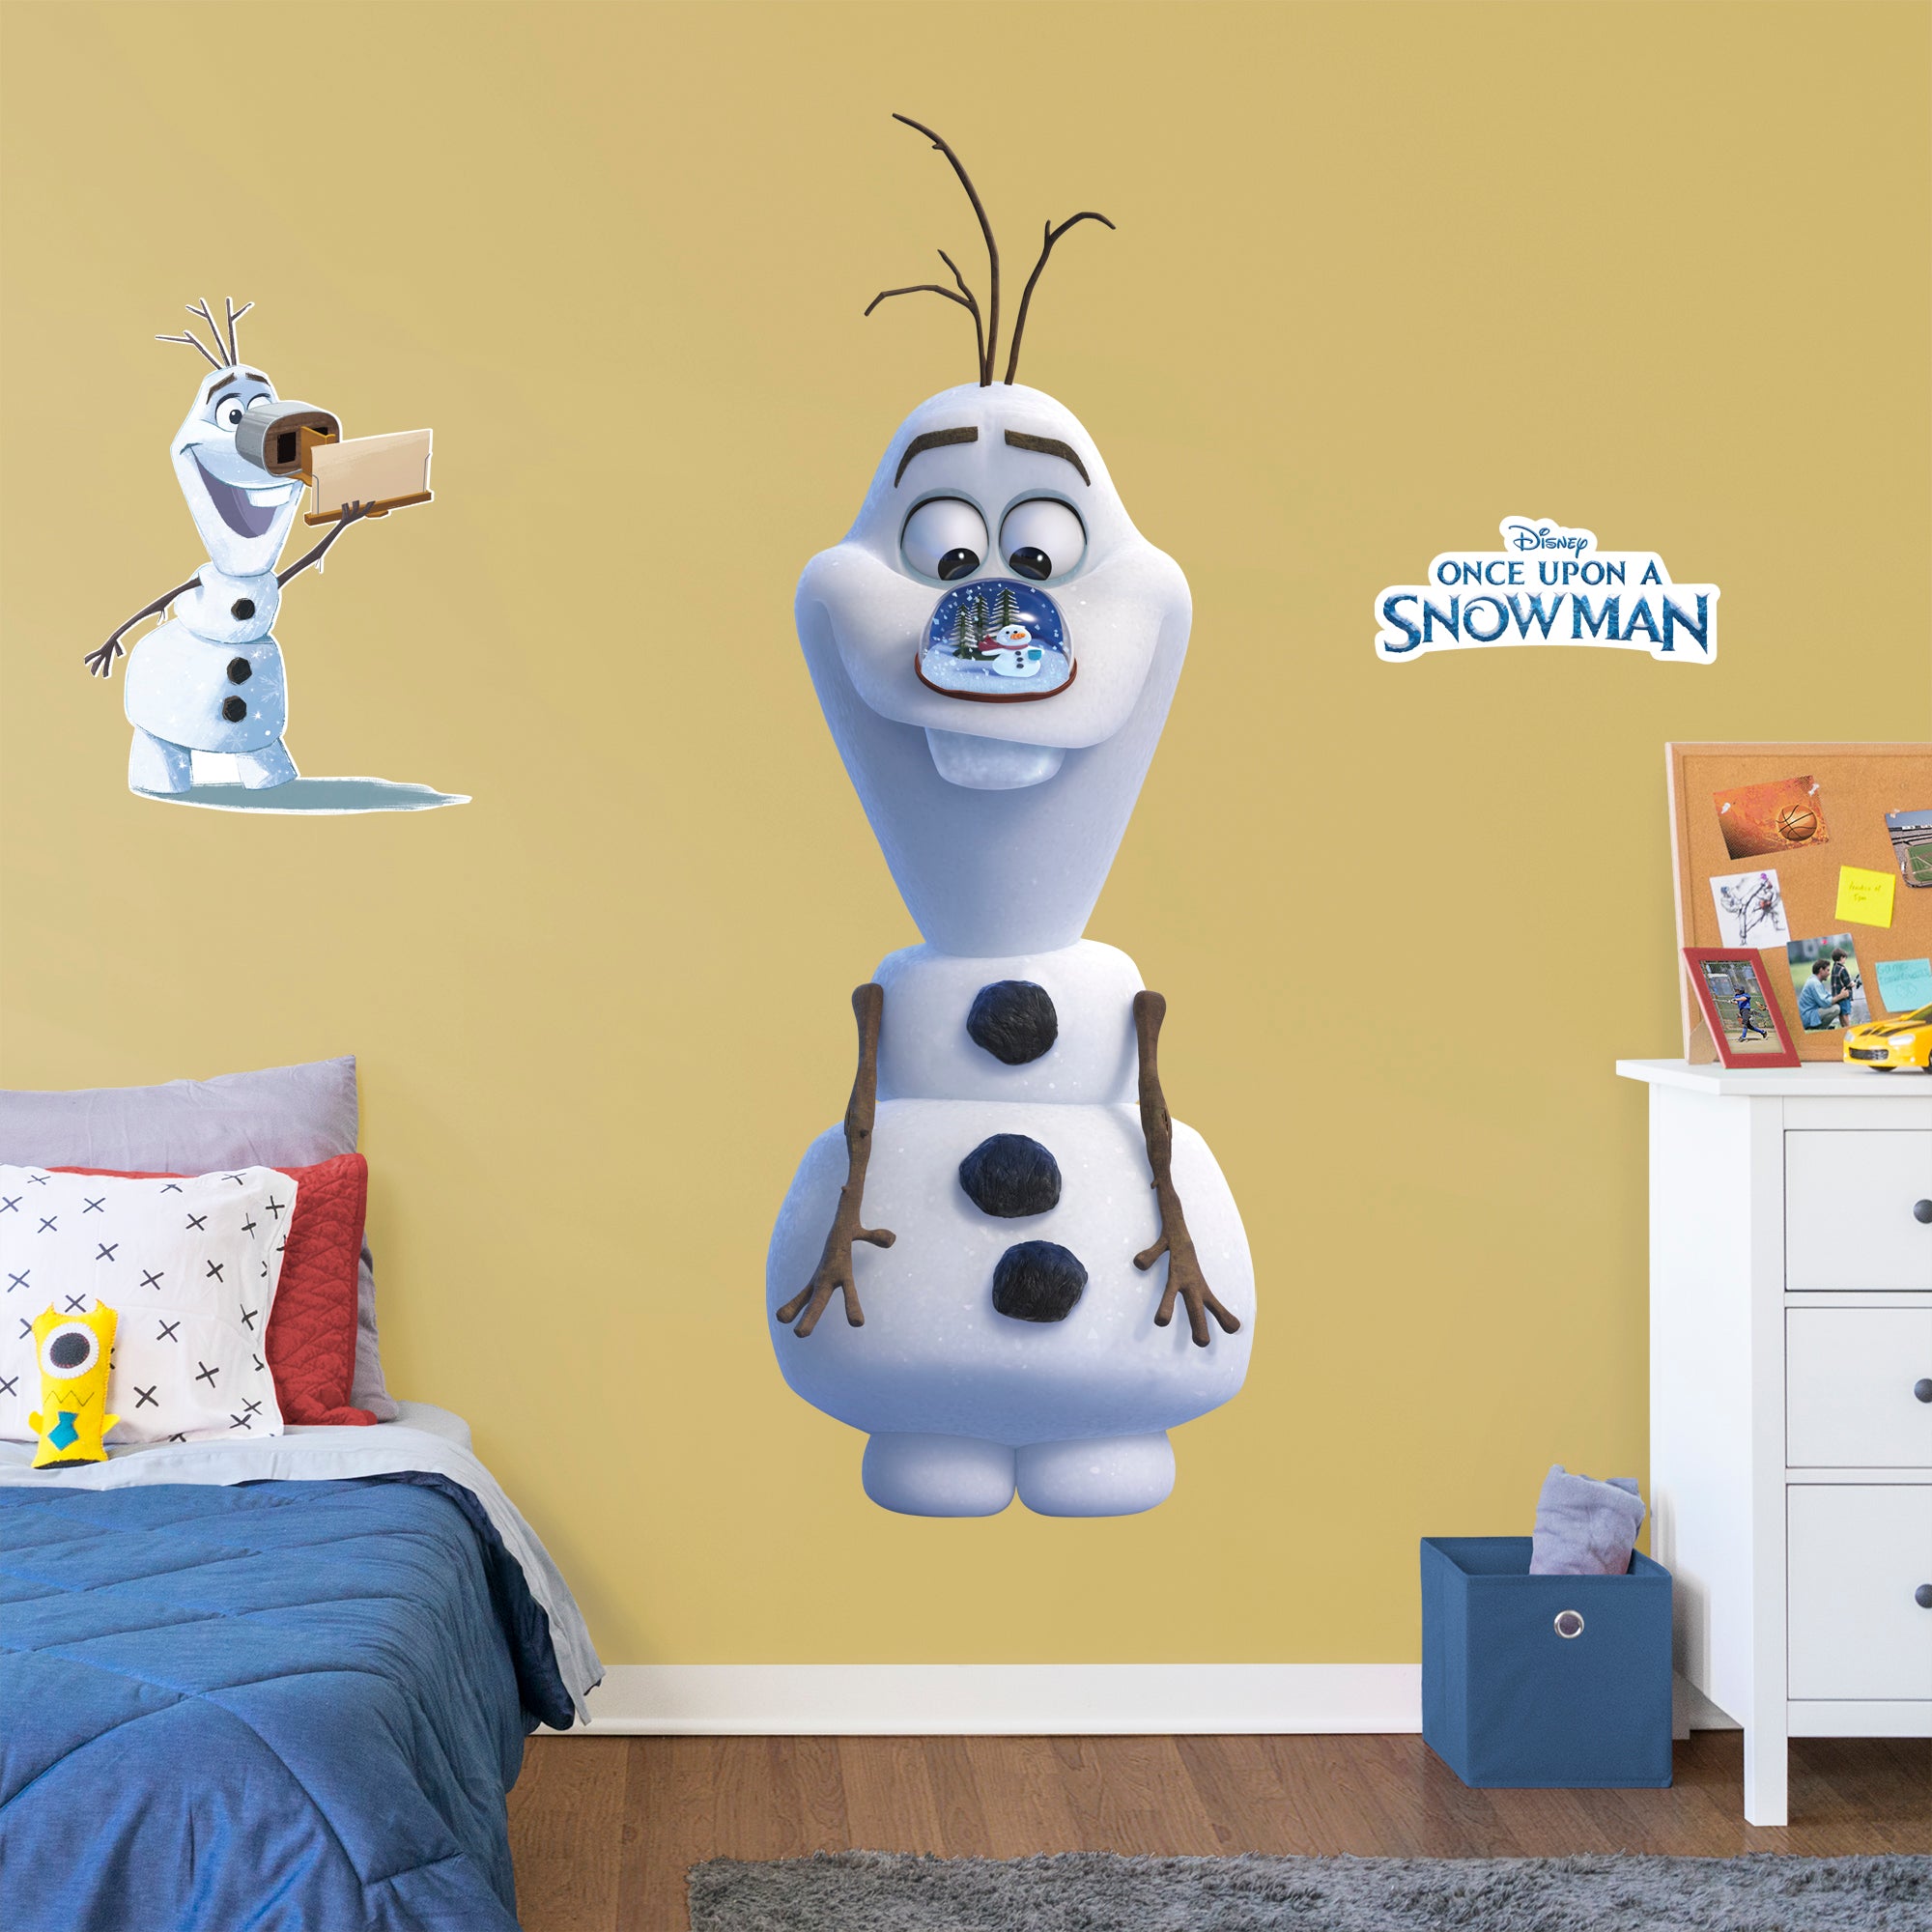 Olaf: Snowglobe - Frozen - Once Upon A Snowman - Officially Licensed Disney Removable Wall Decal Life-Size Character + 2 Decals